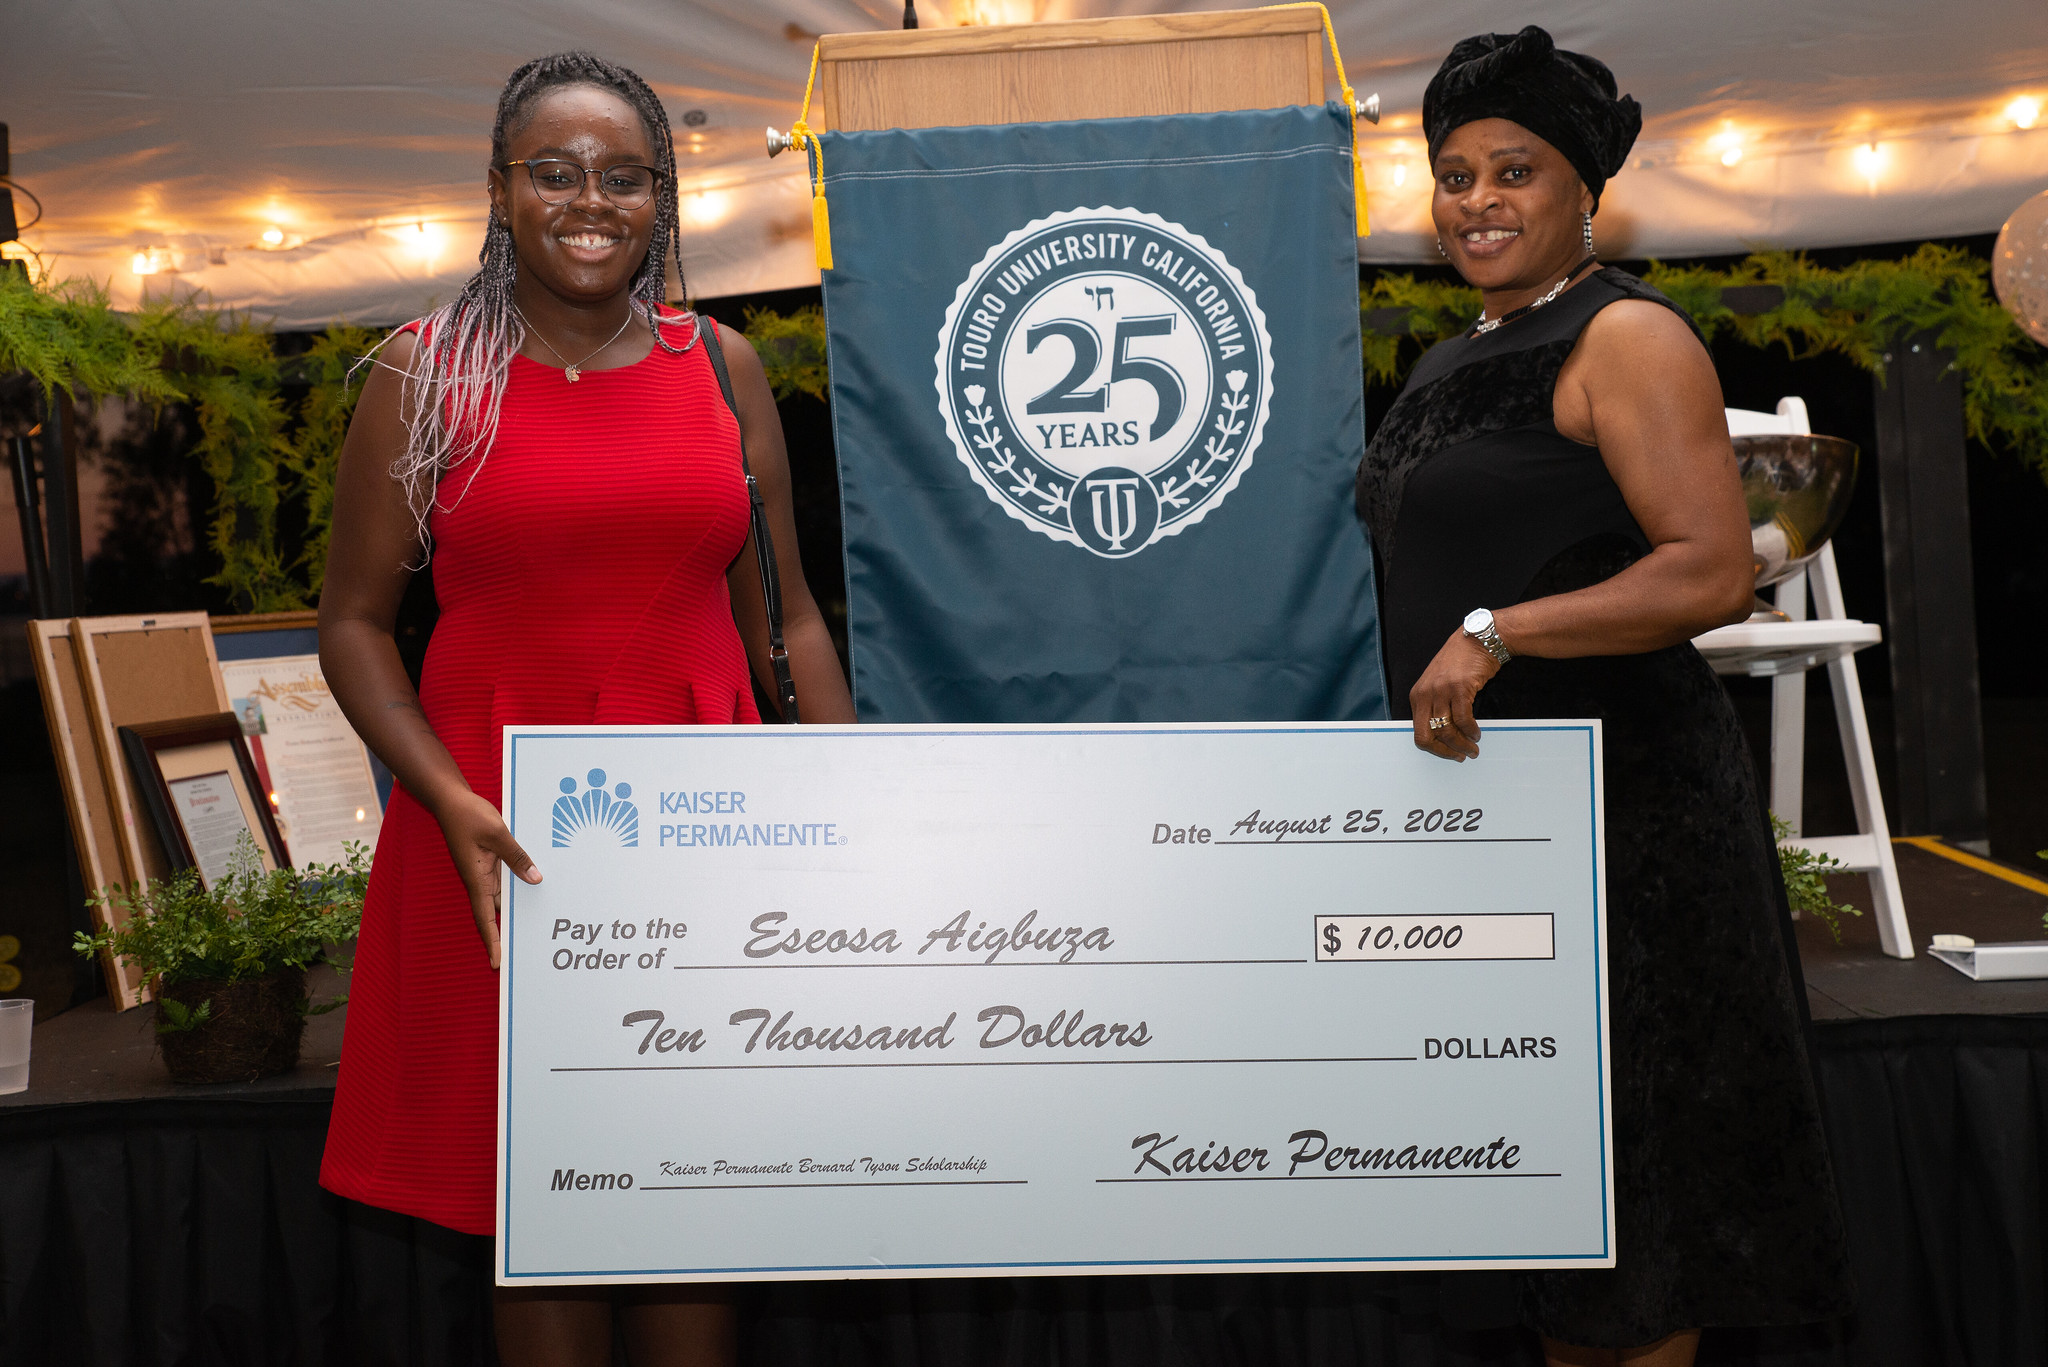 Eseosa “Essie” Aigbuza, a pharmacy student shown standing holding one end of the  Kaiser Permanente Bernard Tyson Scholarship while her mother holds the other